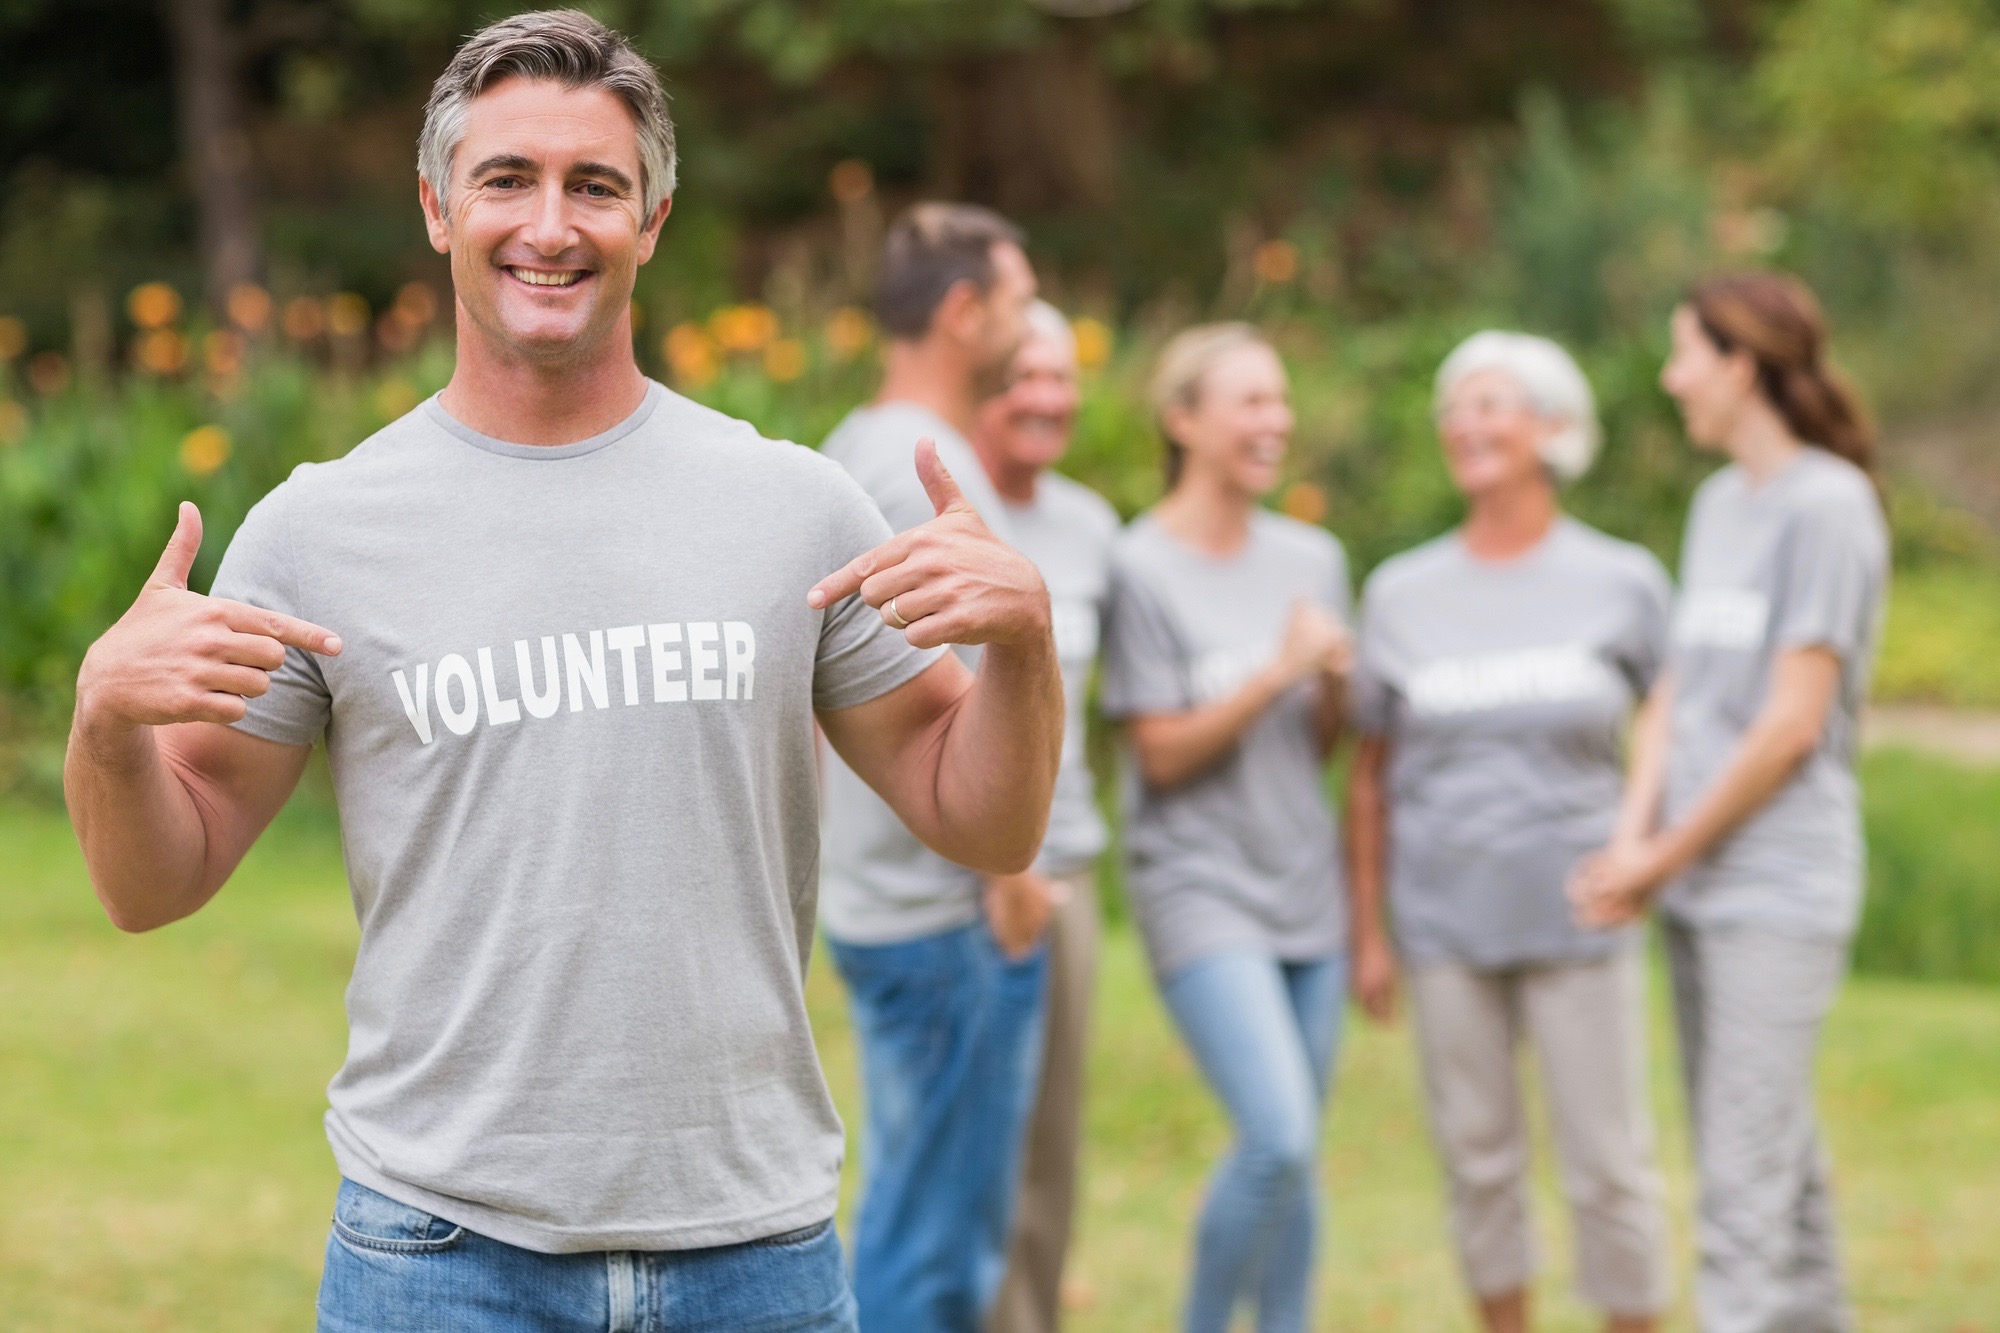 It's National Volunteer month, so see which 55+ communities provide volunteering opportunities.